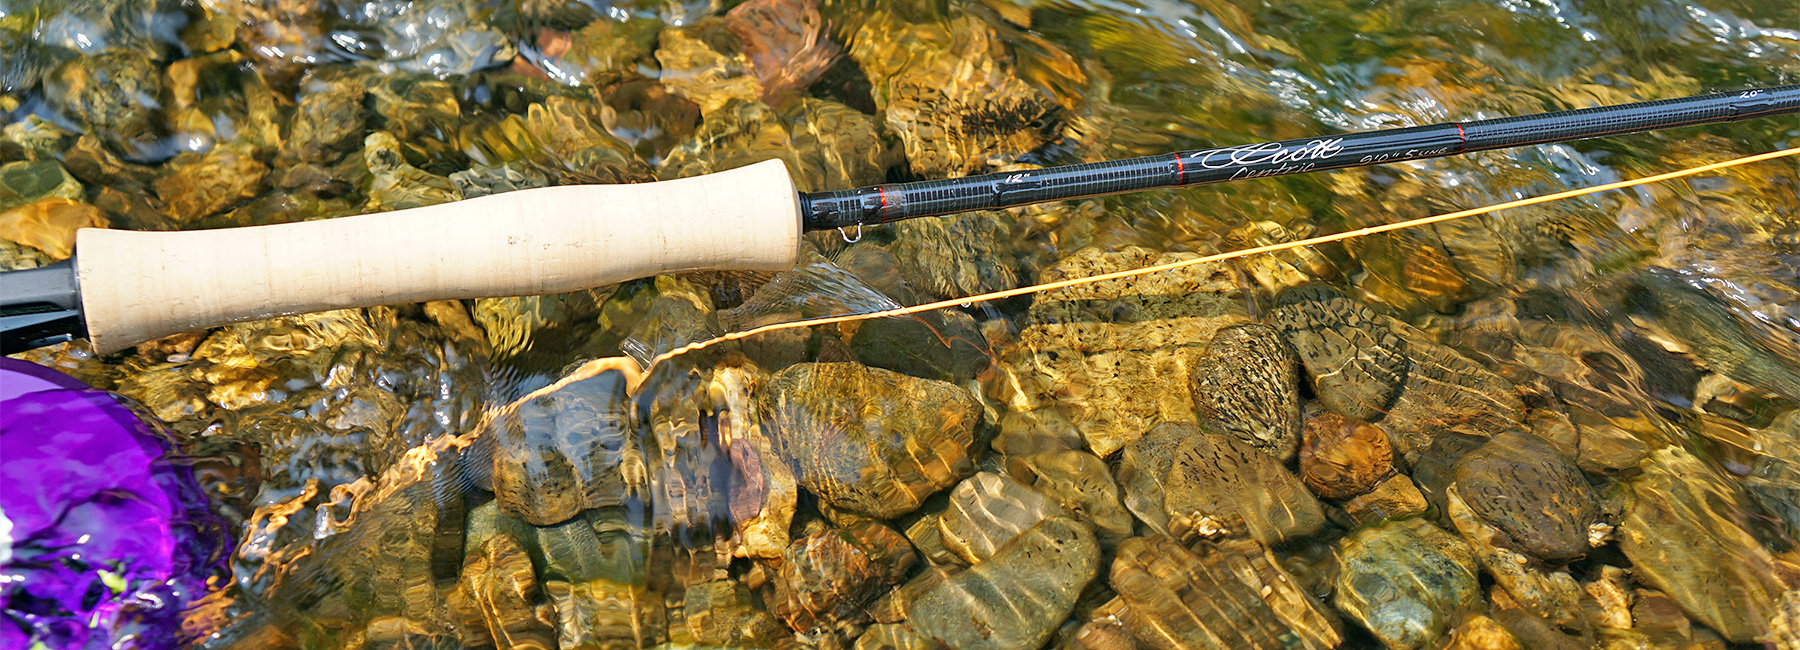 Wholesale Spey Salmon Double Fighting Butt Fly Fishing Rod